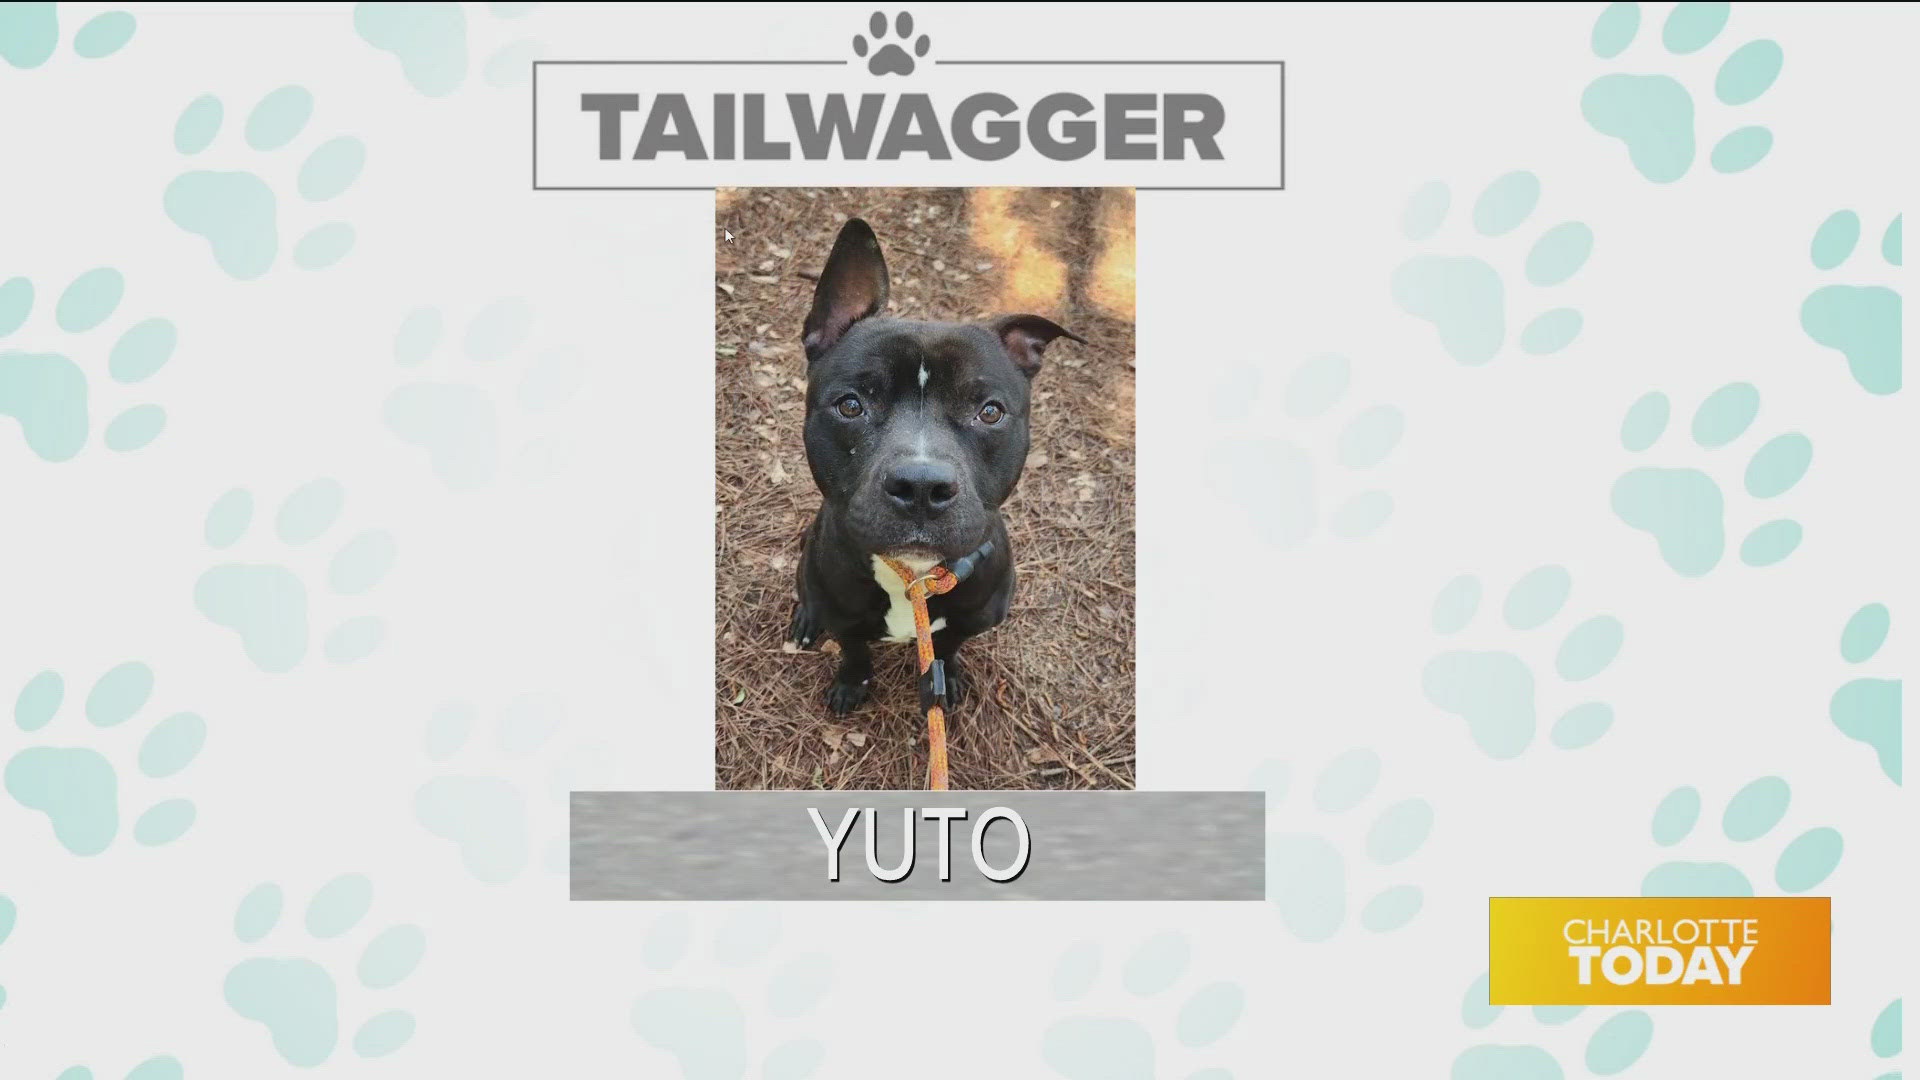 Yuto is available for adoption from Animal Care and Control